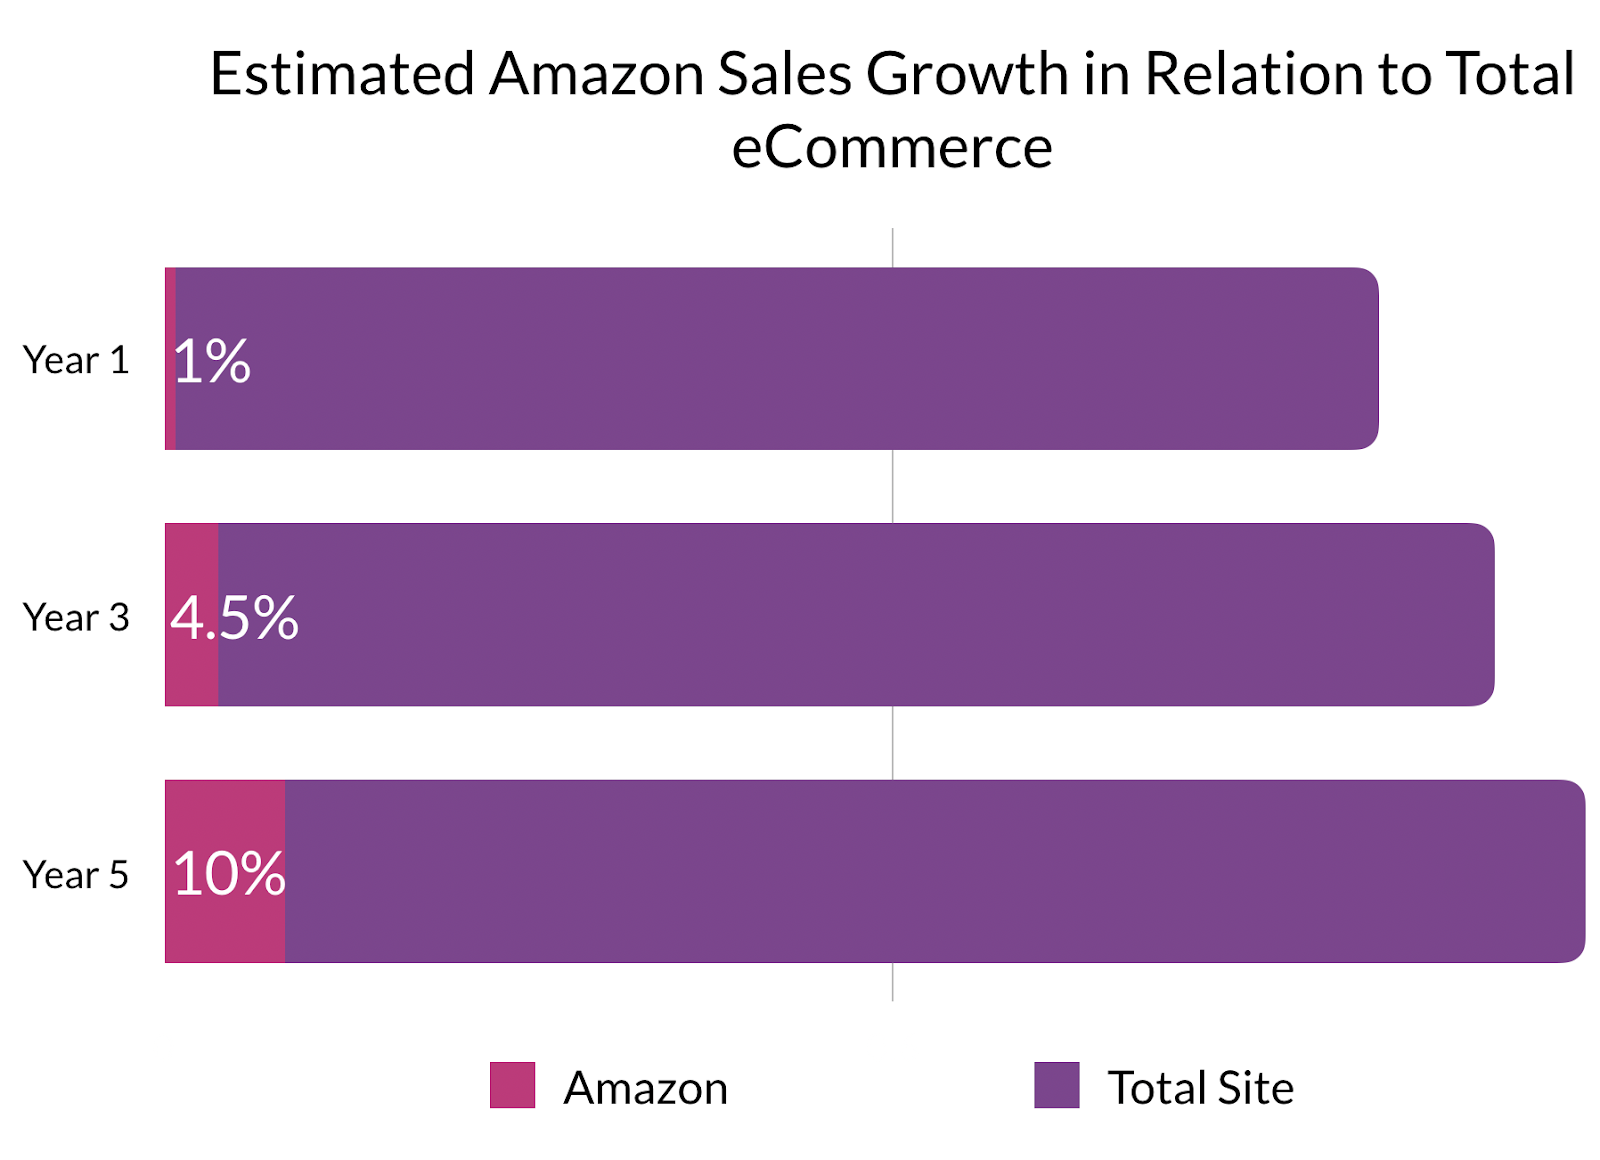 Estimated Amazon Sales Growth in Relation to Total eCommerce